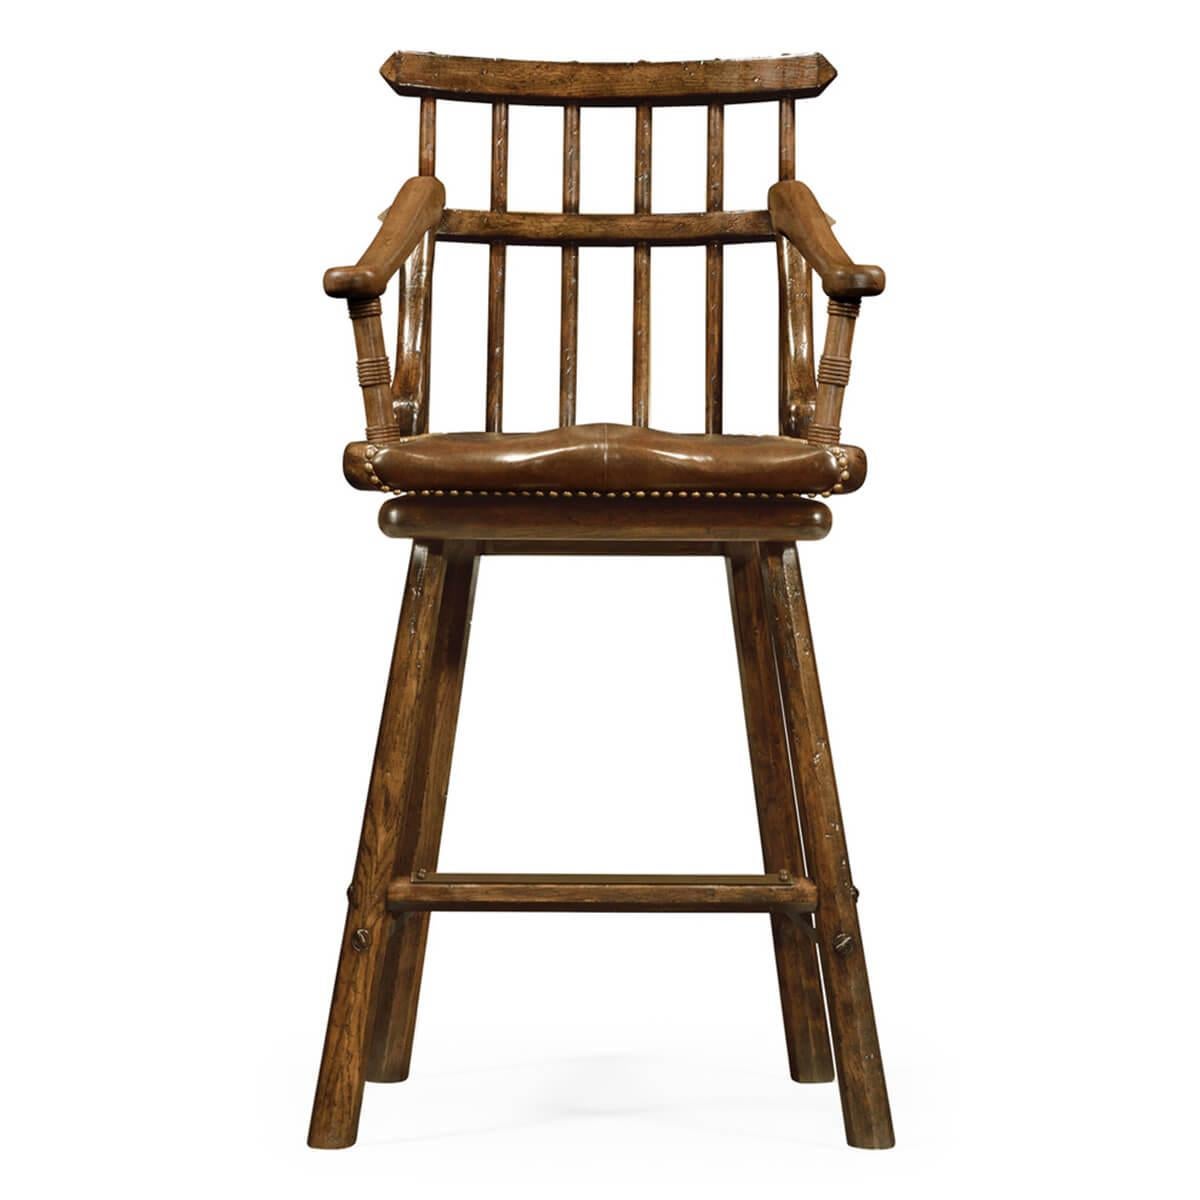 Heavily distressed dark oak armchair barstool with a batoned back, sweeping arms supported on ring turned uprights, shaped supports, and a studded leather revolving seat. The legs with tapering hexagonal cross-section.

Dimensions: 24.75